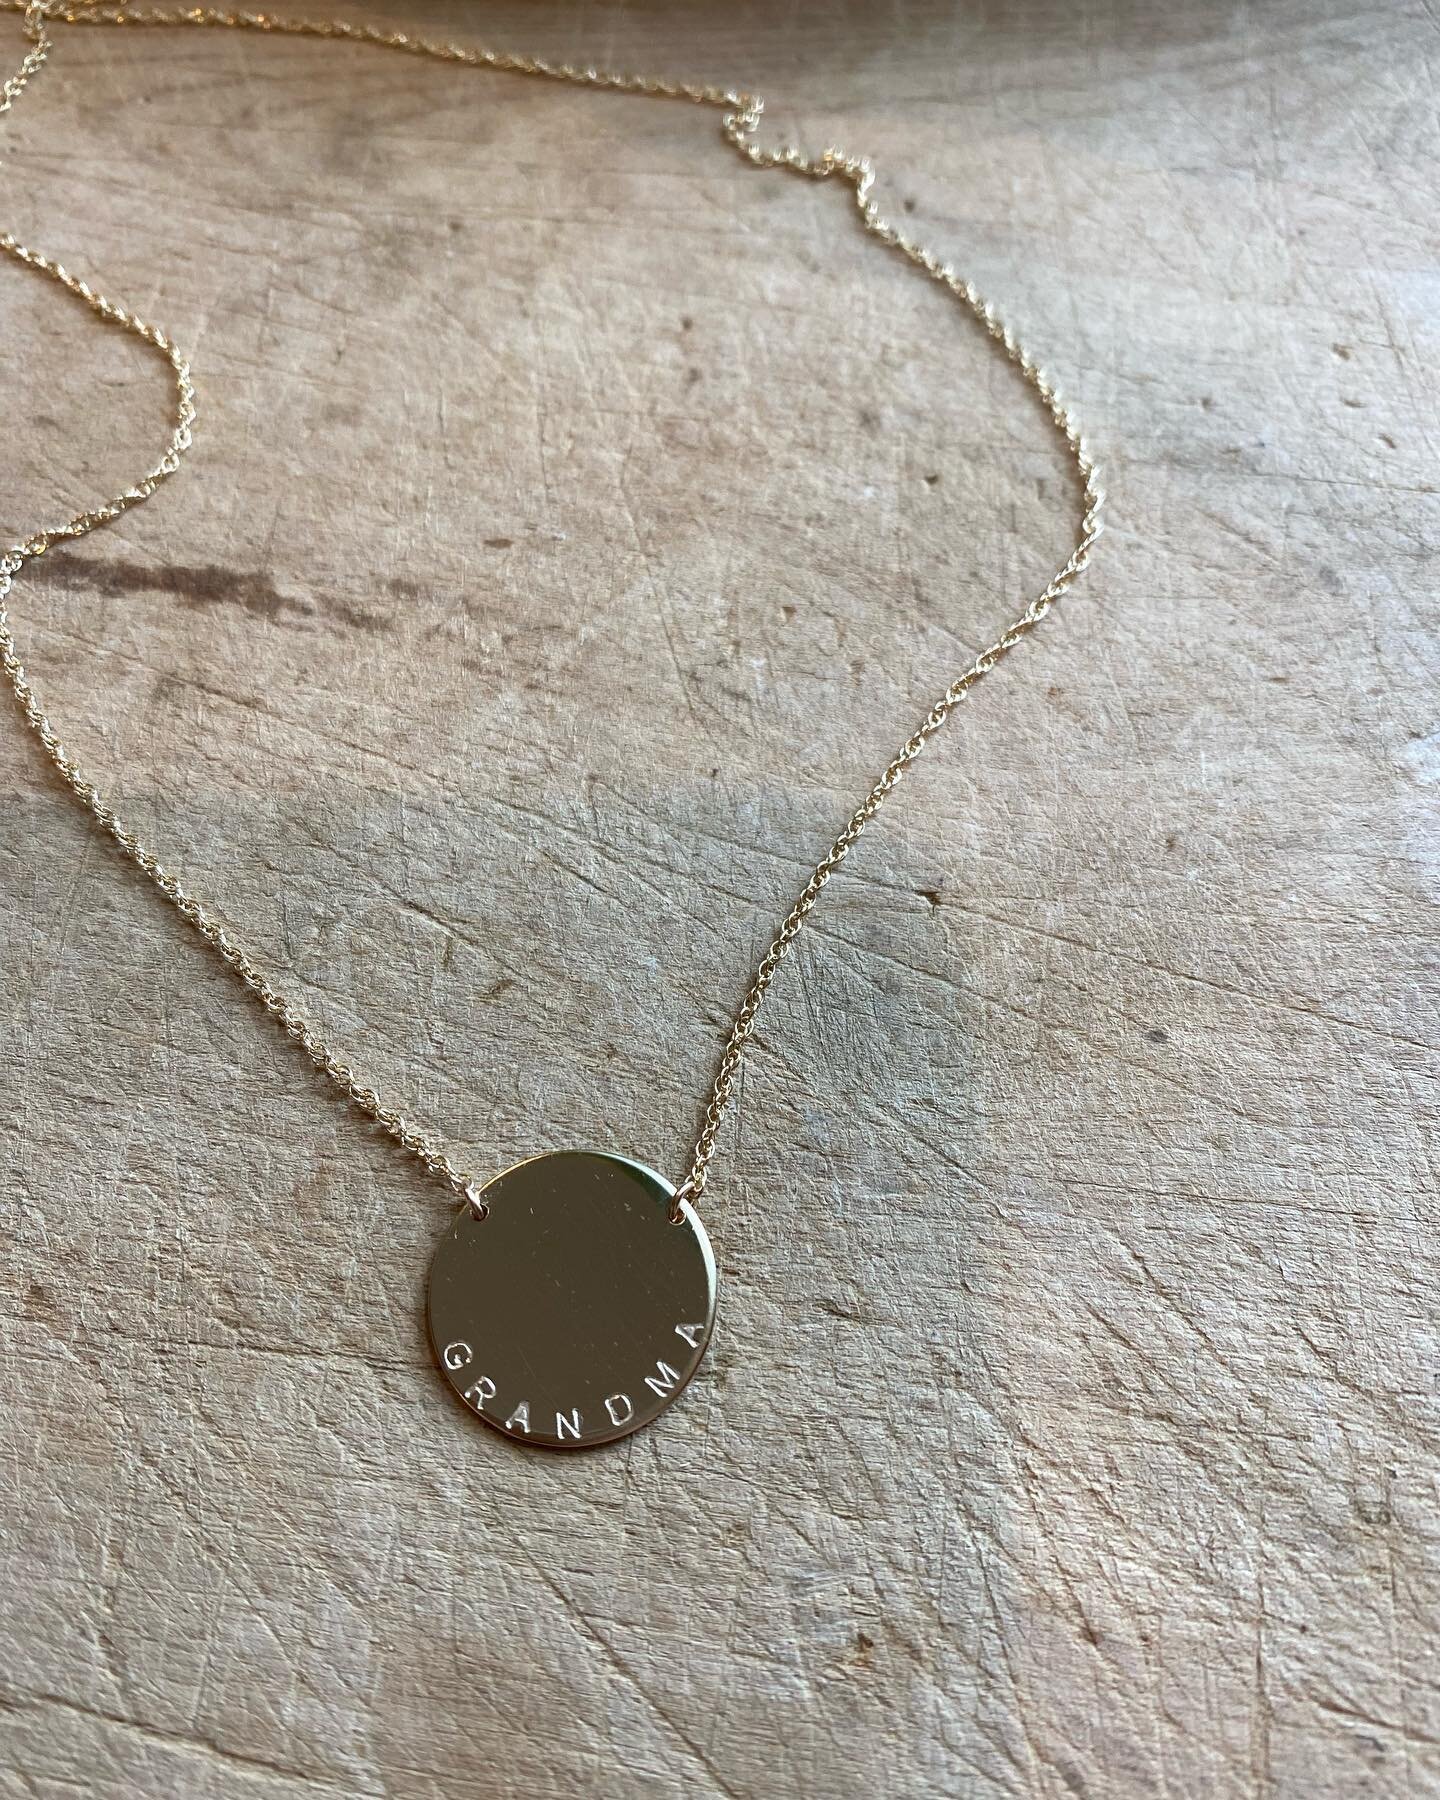 GRANDMA | 🫶🏼

I made this necklace for my sweet grandma for Mother&rsquo;s Day. If anyone knows her, they know she is the most selfless being. She raised nine kids and is the best grandma and great grandma to us all. 

Does your grandmother go by a